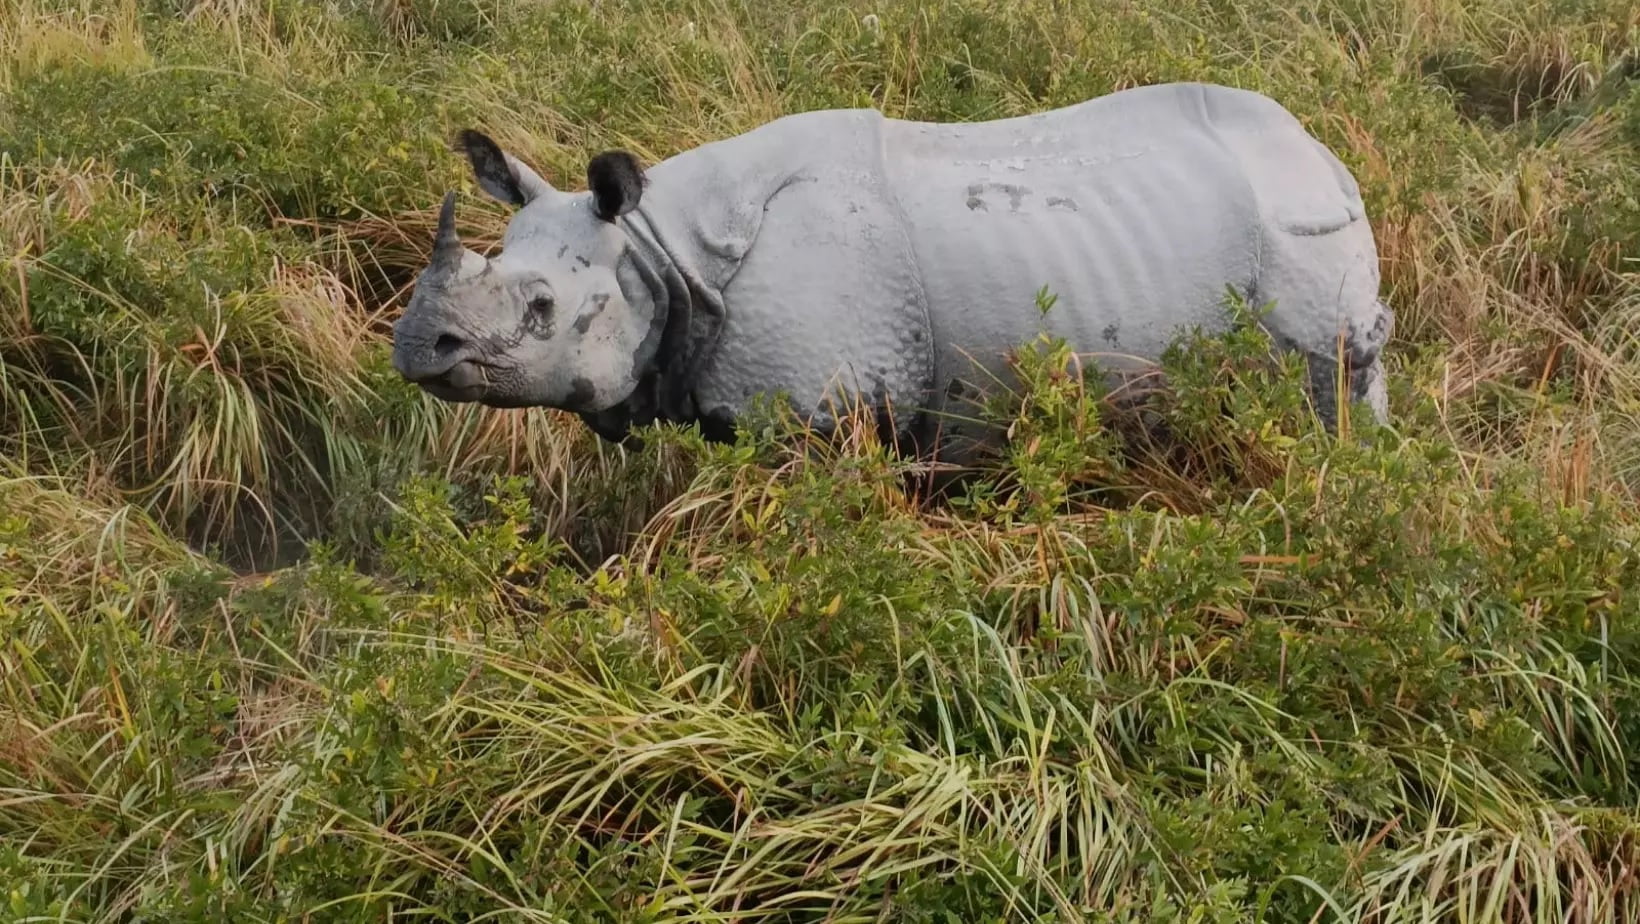 In Assam's Kaziranga National Park, two officers were attacked by a rhinoceros, the injured were admitted to hospital